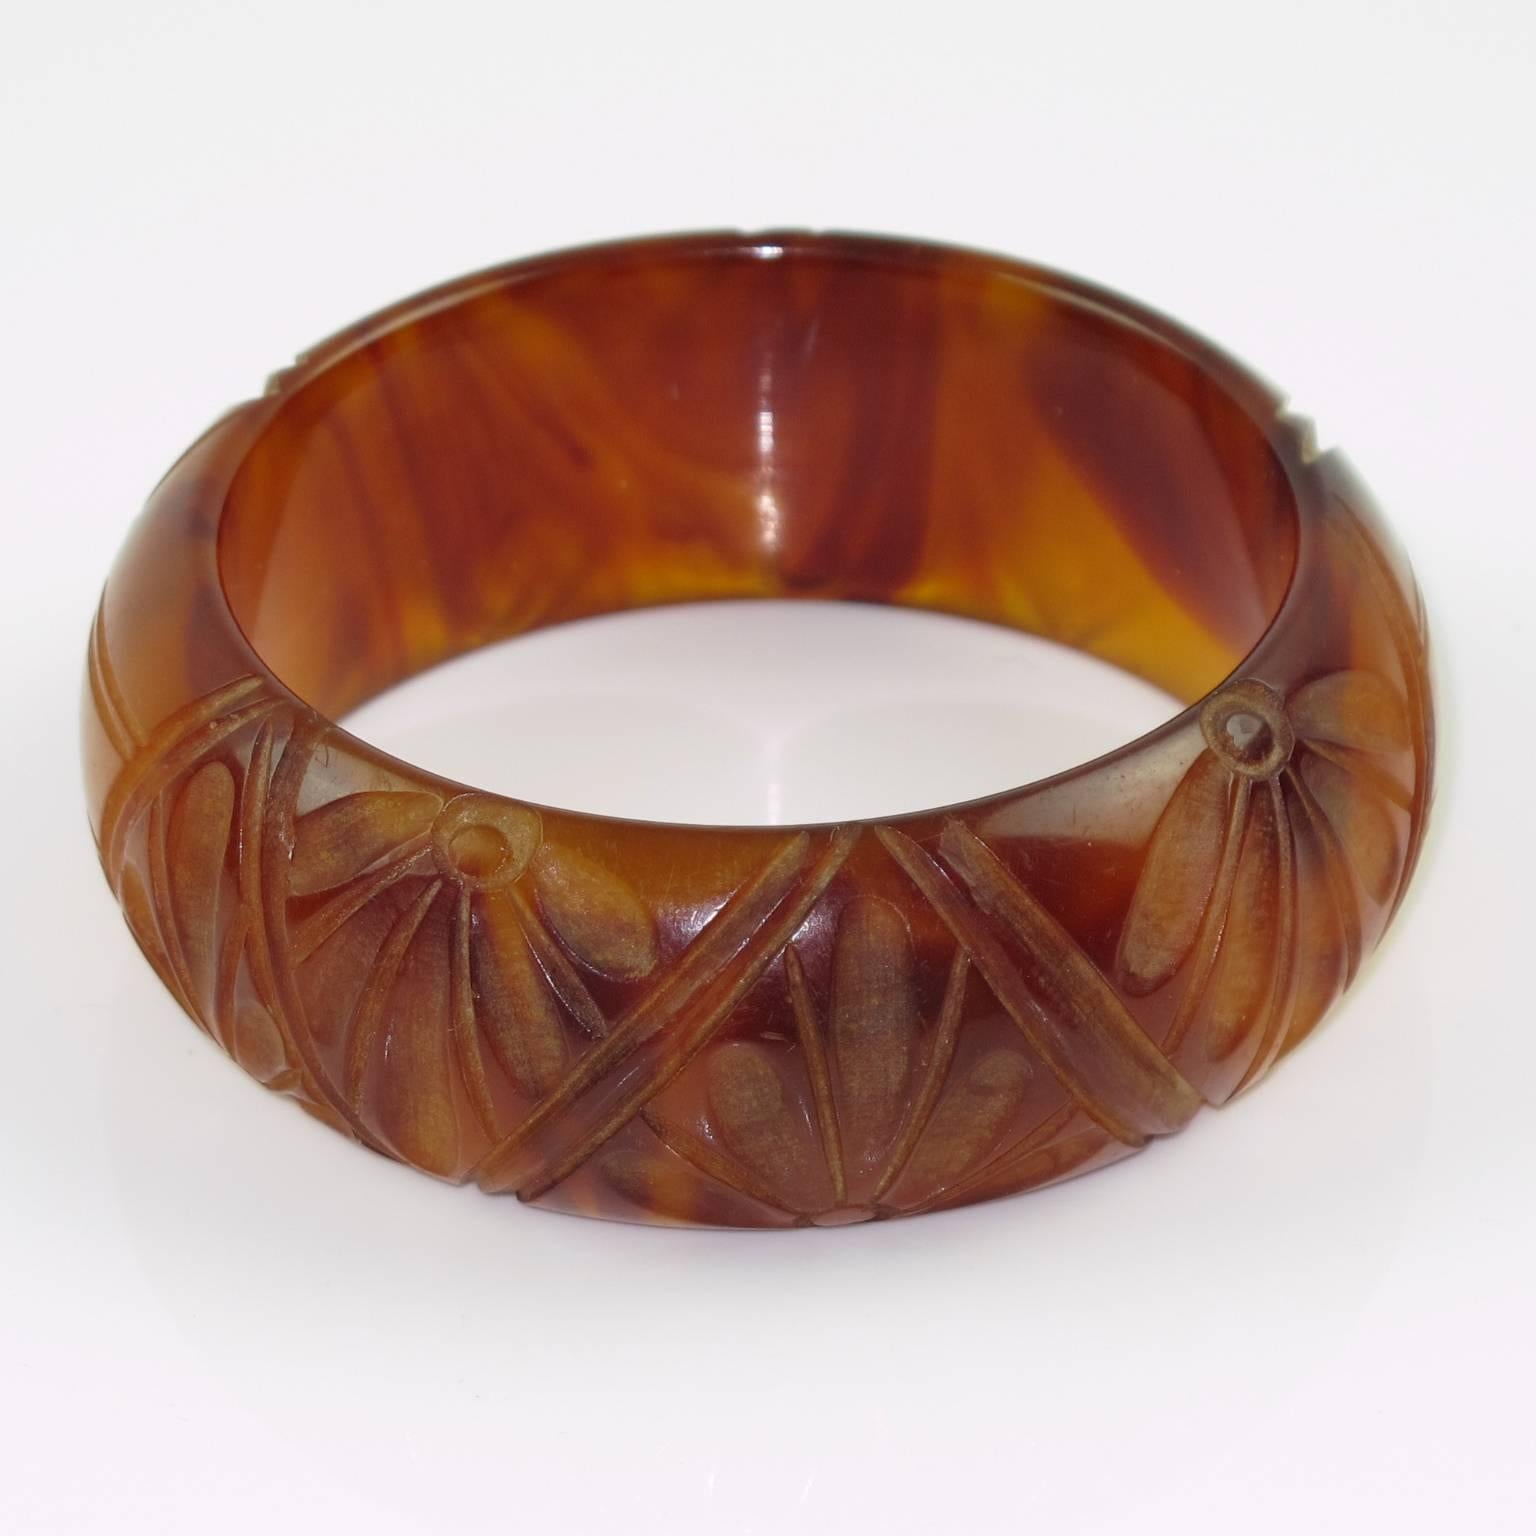 Vintage rootbeer and amber marble marble Bakelite carved bracelet bangle. Domed shape with deep geometric and floral carving all around. Intense amber marble tone with rootbeer cloudy swirling, lots of translucency. Excellent vintage condition.